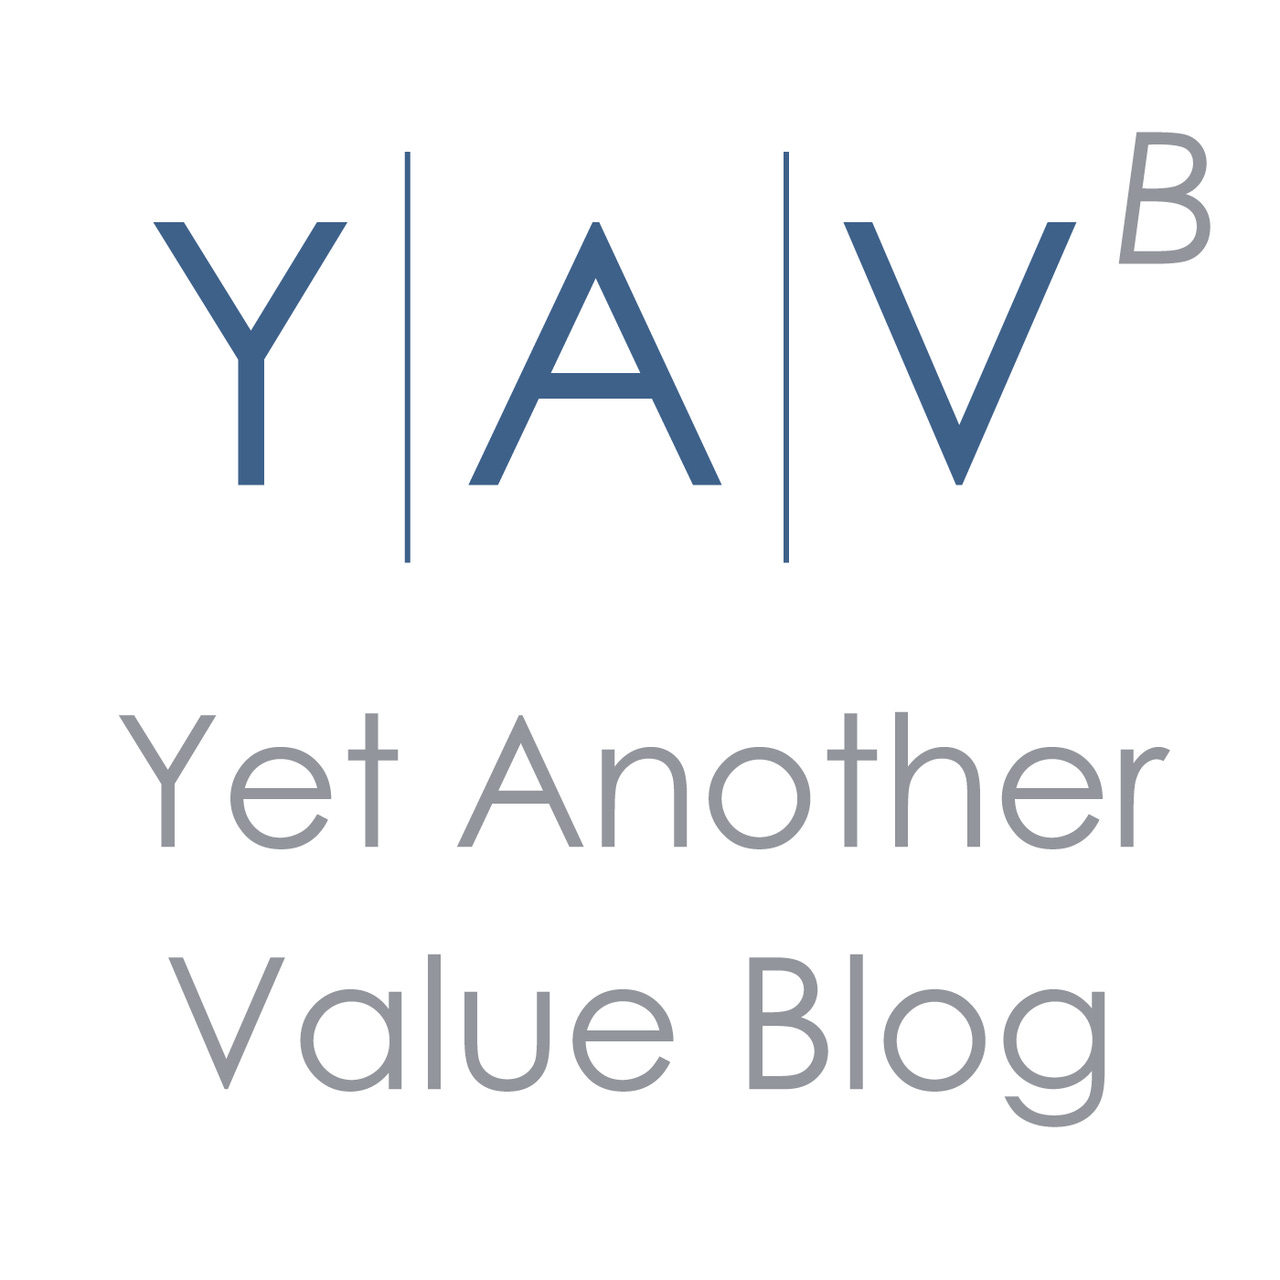 Yet Another Value Blog